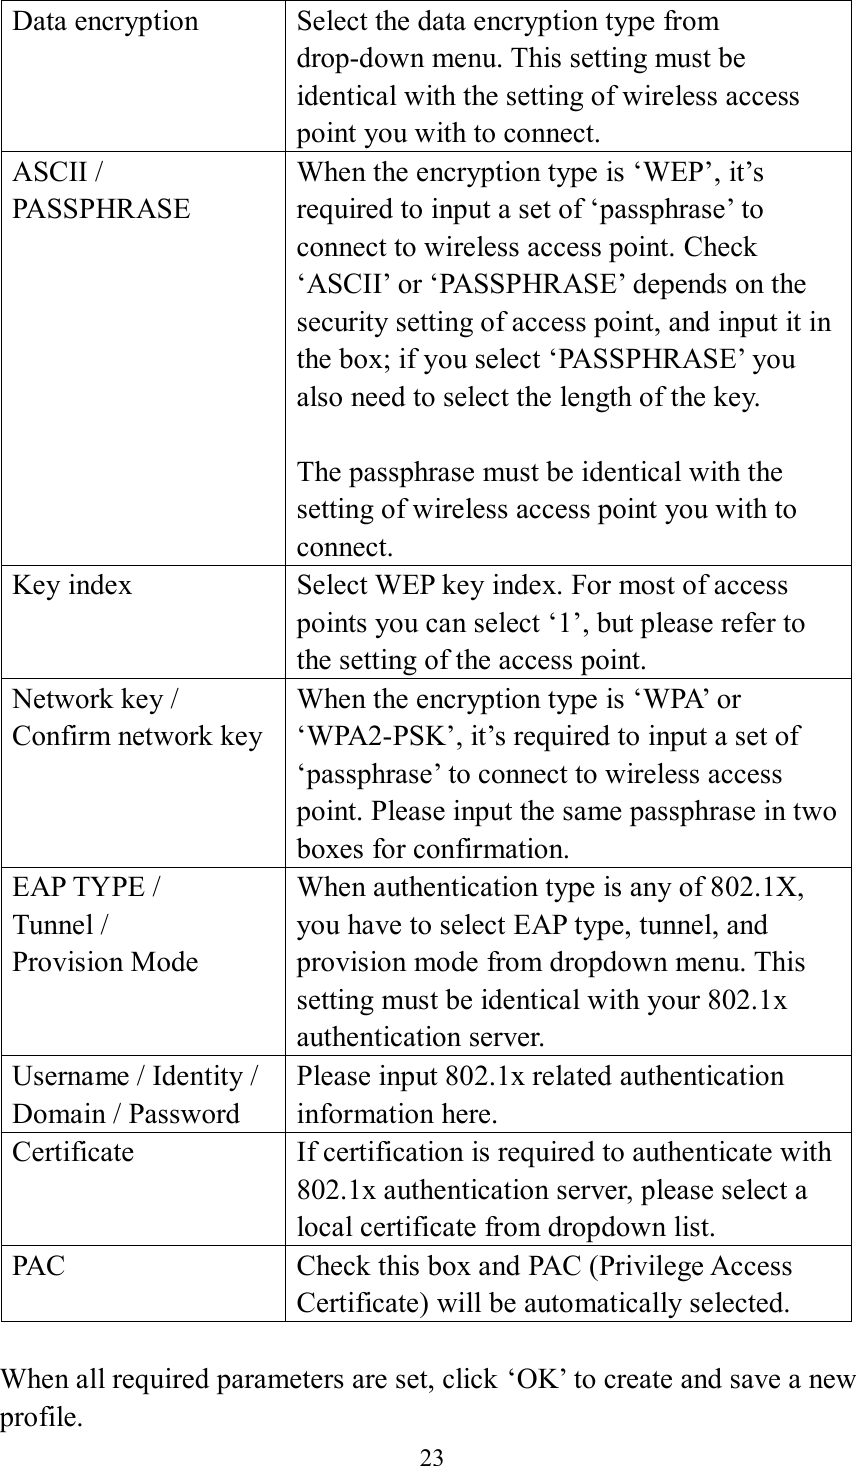 23  Data encryption Select the data encryption type from drop-down menu. This setting must be identical with the setting of wireless access point you with to connect. ASCII / PASSPHRASE When the encryption type is ‘WEP’, it’s required to input a set of ‘passphrase’ to connect to wireless access point. Check ‘ASCII’ or ‘PASSPHRASE’ depends on the security setting of access point, and input it in the box; if you select ‘PASSPHRASE’ you also need to select the length of the key.  The passphrase must be identical with the setting of wireless access point you with to connect. Key index Select WEP key index. For most of access points you can select ‘1’, but please refer to the setting of the access point. Network key / Confirm network key When the encryption type is ‘WPA’ or ‘WPA2-PSK’, it’s required to input a set of ‘passphrase’ to connect to wireless access point. Please input the same passphrase in two boxes for confirmation. EAP TYPE / Tunnel / Provision Mode When authentication type is any of 802.1X, you have to select EAP type, tunnel, and provision mode from dropdown menu. This setting must be identical with your 802.1x authentication server. Username / Identity / Domain / Password Please input 802.1x related authentication information here.   Certificate If certification is required to authenticate with 802.1x authentication server, please select a local certificate from dropdown list. PAC Check this box and PAC (Privilege Access Certificate) will be automatically selected.  When all required parameters are set, click ‘OK’ to create and save a new profile.   